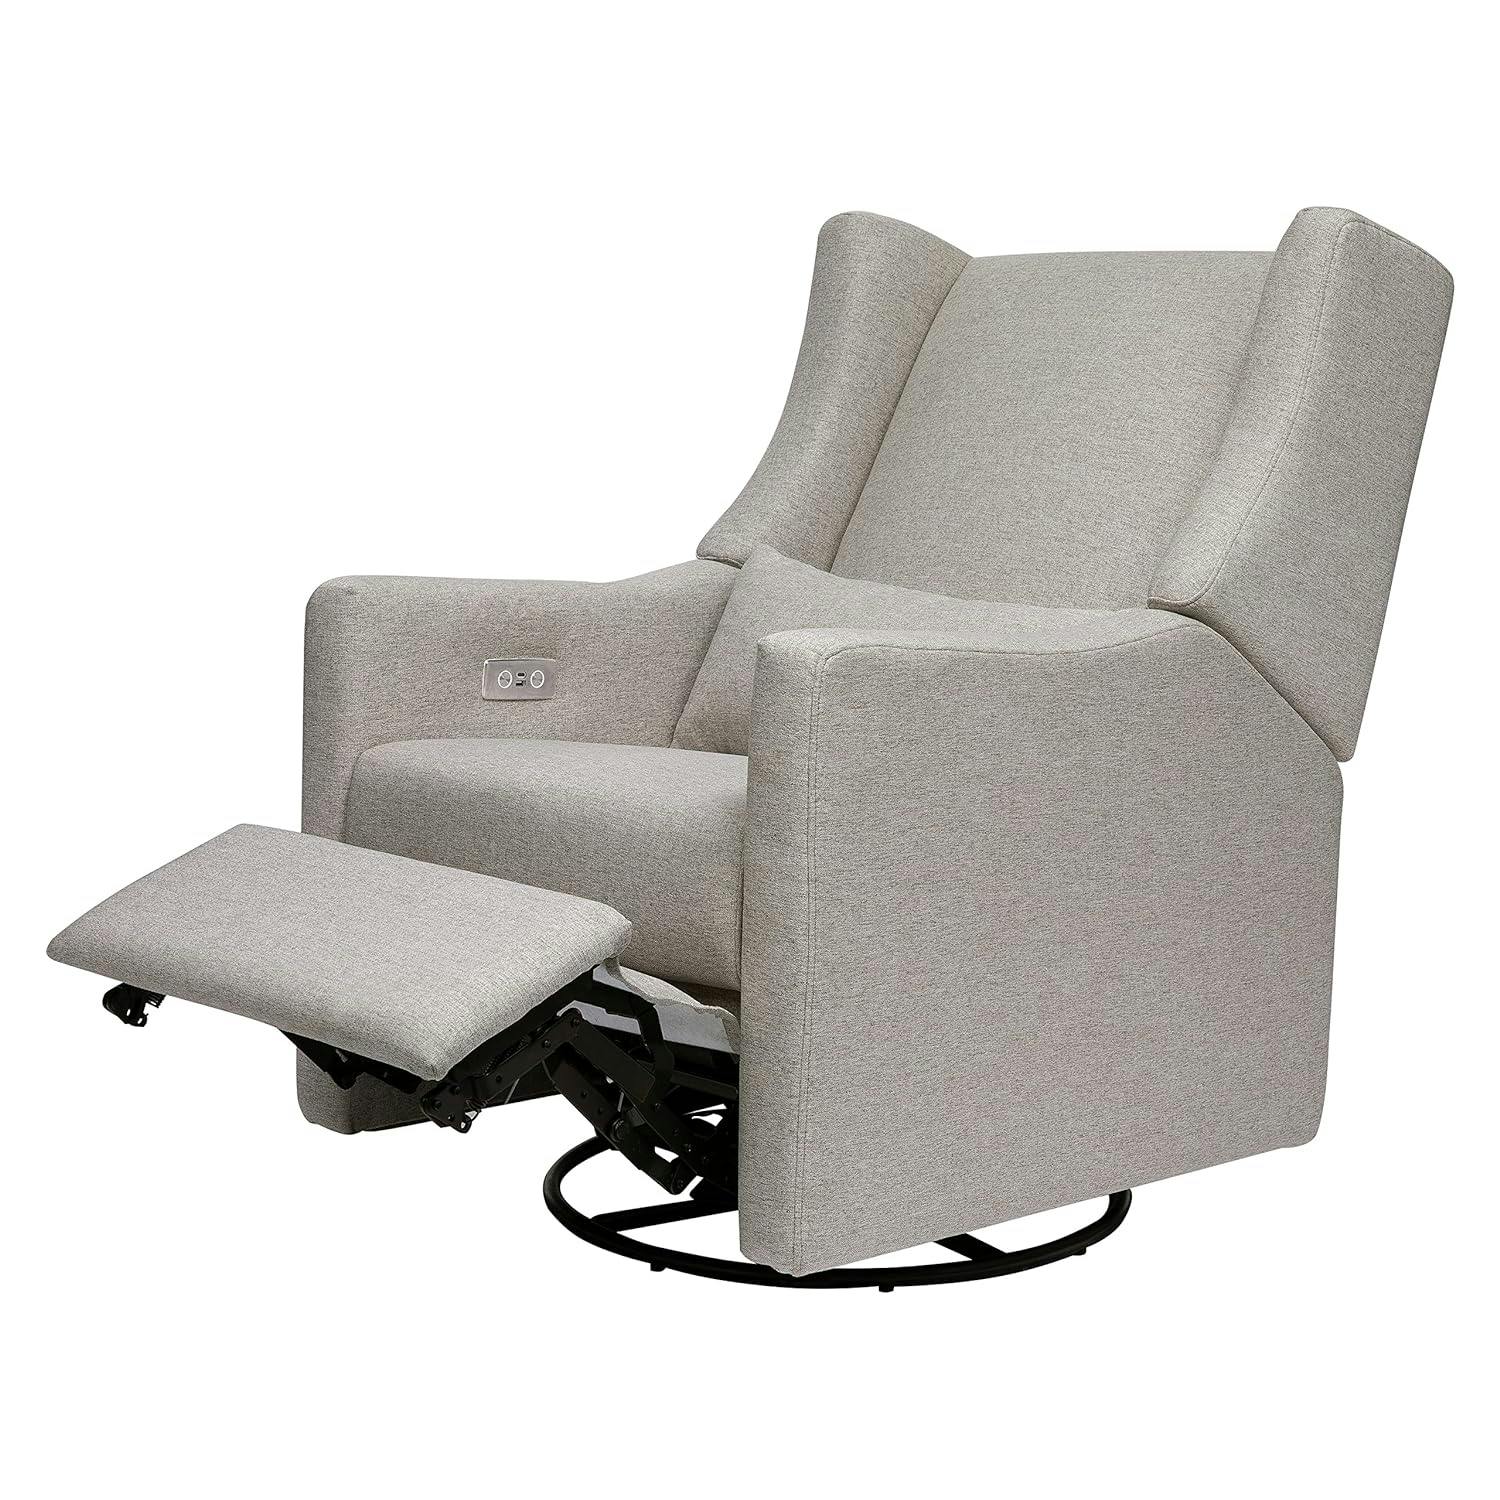 Kiwi Grey Eco-Performance Electronic Recliner and Swivel Glider with USB Port